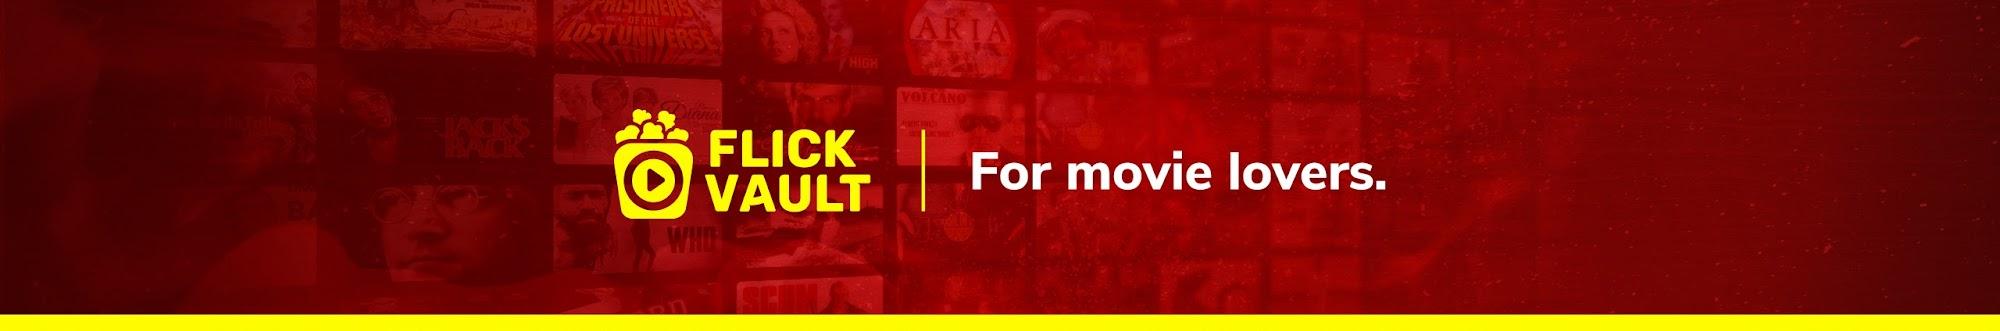 Flick Vault - Full HD Movies for Free